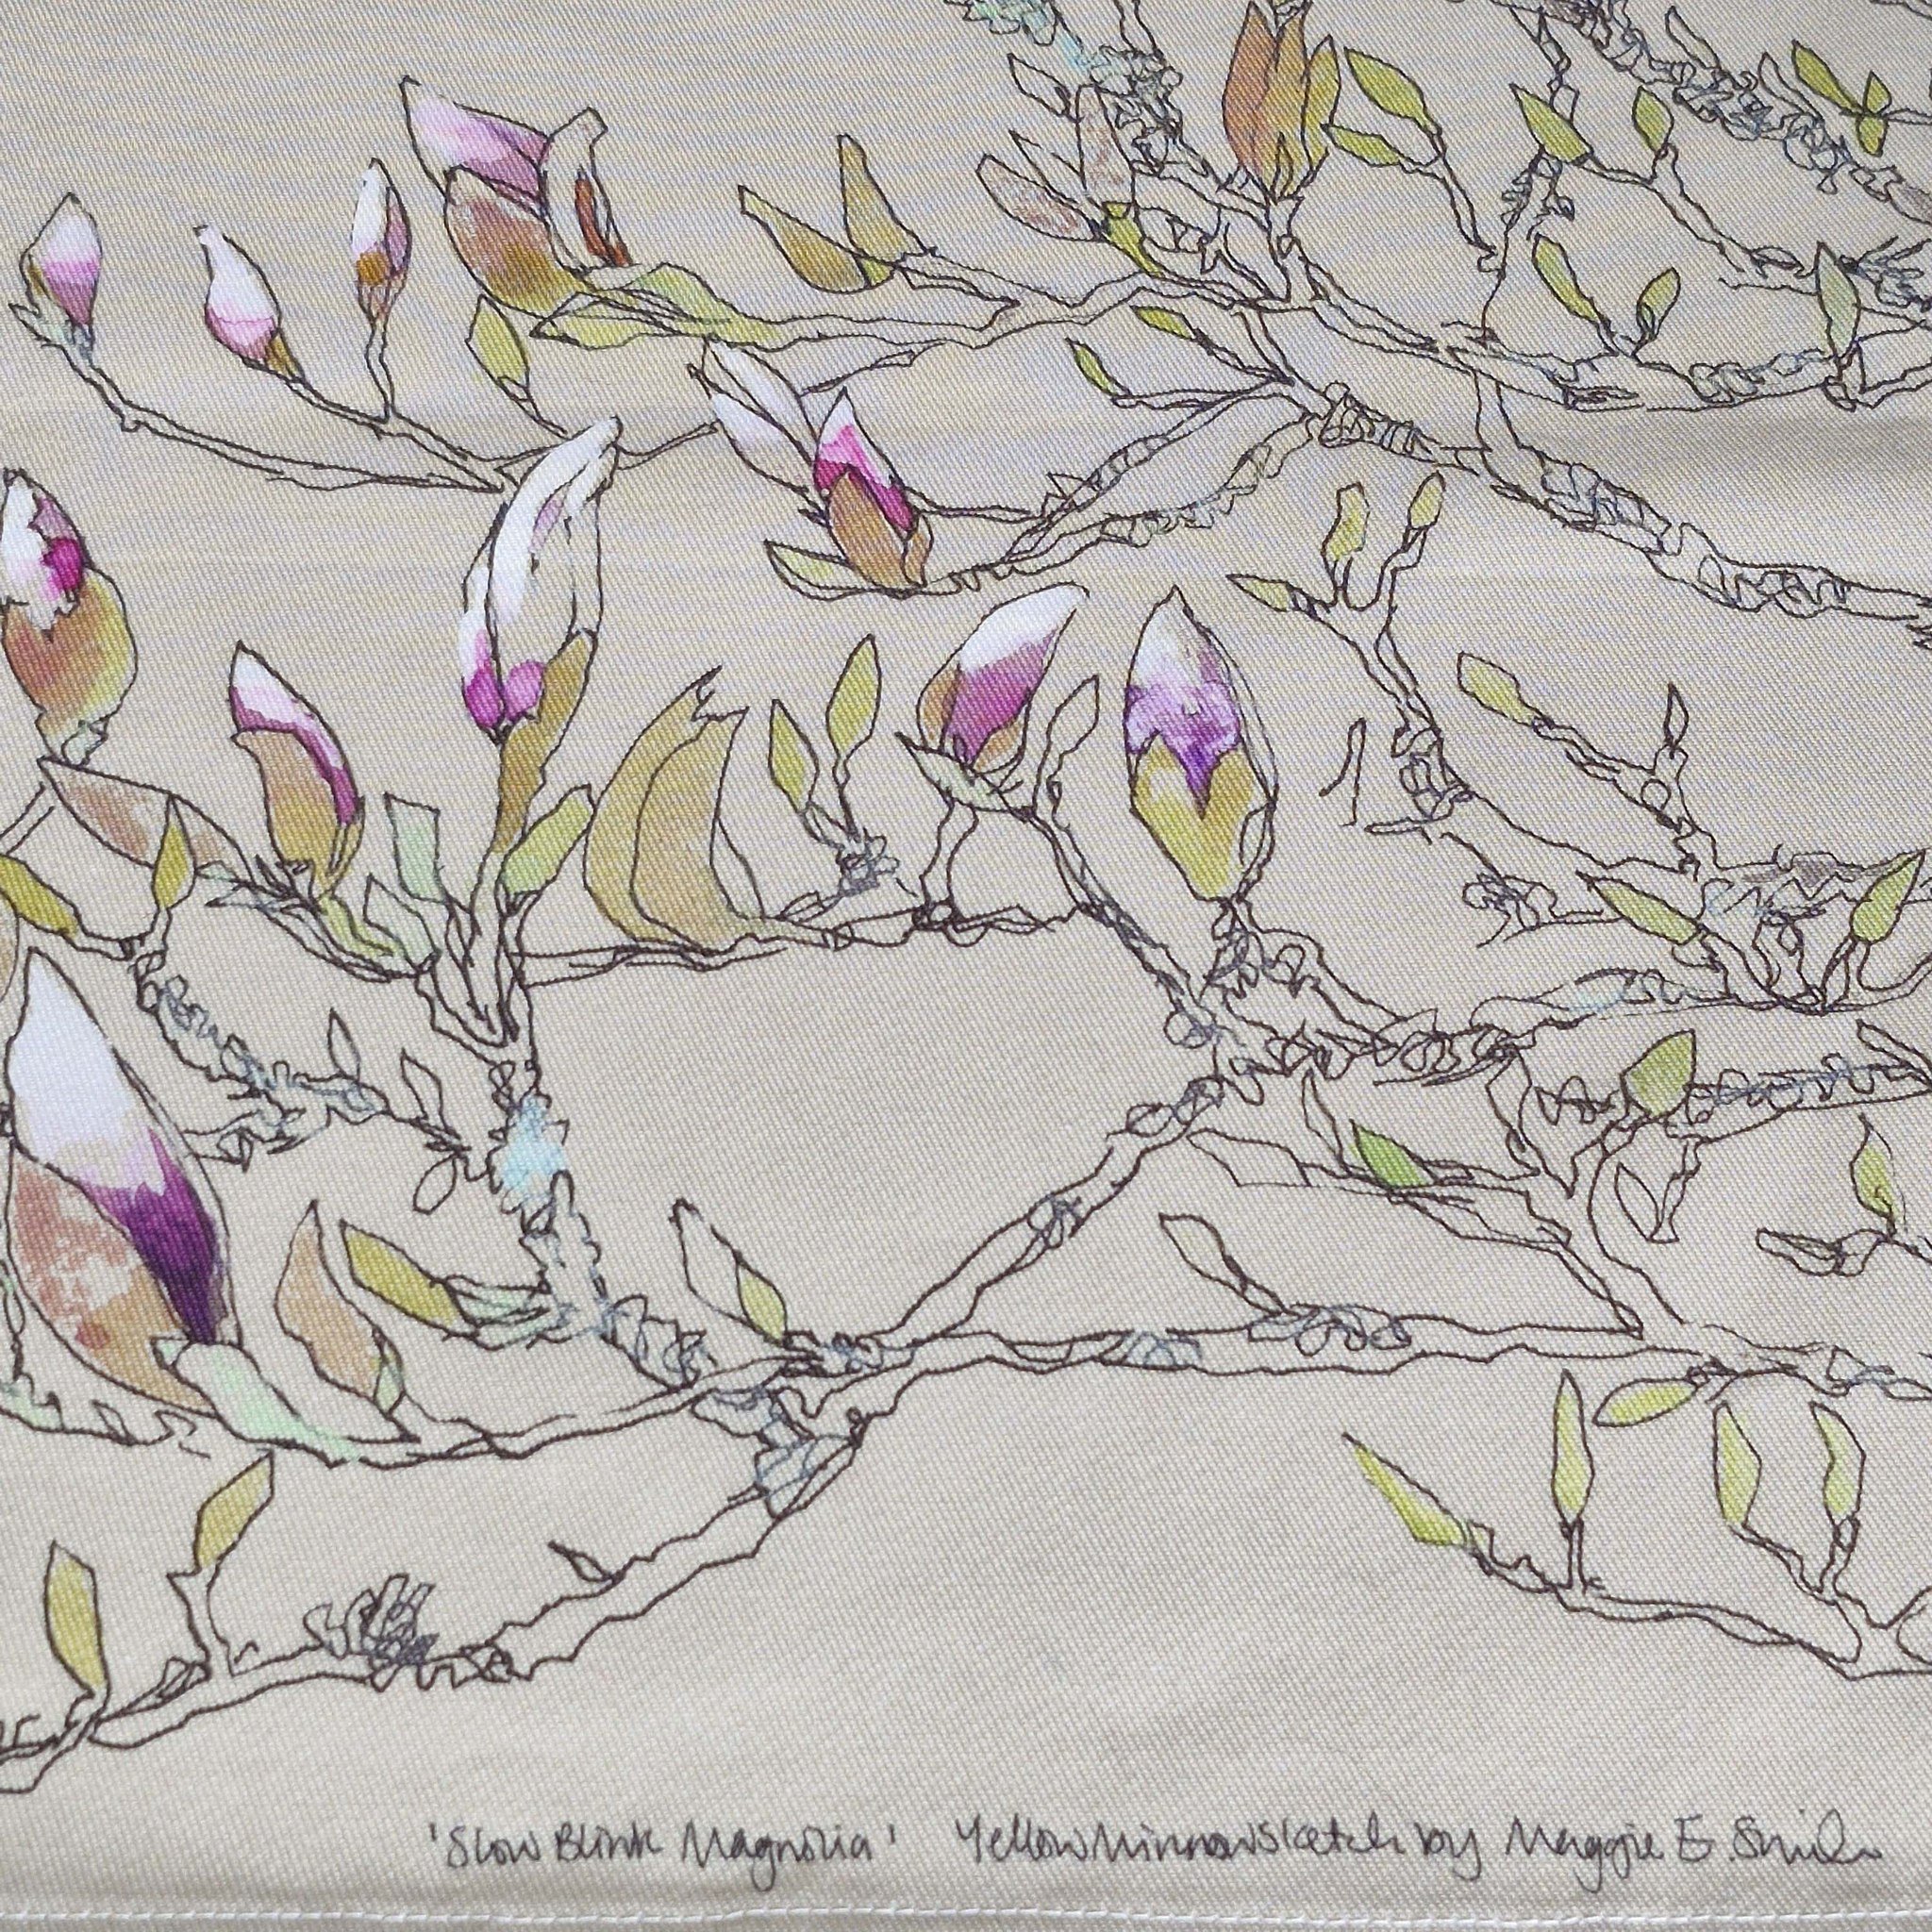 Magnolia Memory:
Artist and product feature

Maggie Smith&rsquo;s beautifully vibrant drawing of the magnolia tree in her garden, available printed on a soft twill fabric. The 'Slow Blink' Magnolia table runner is developed from the original triptych